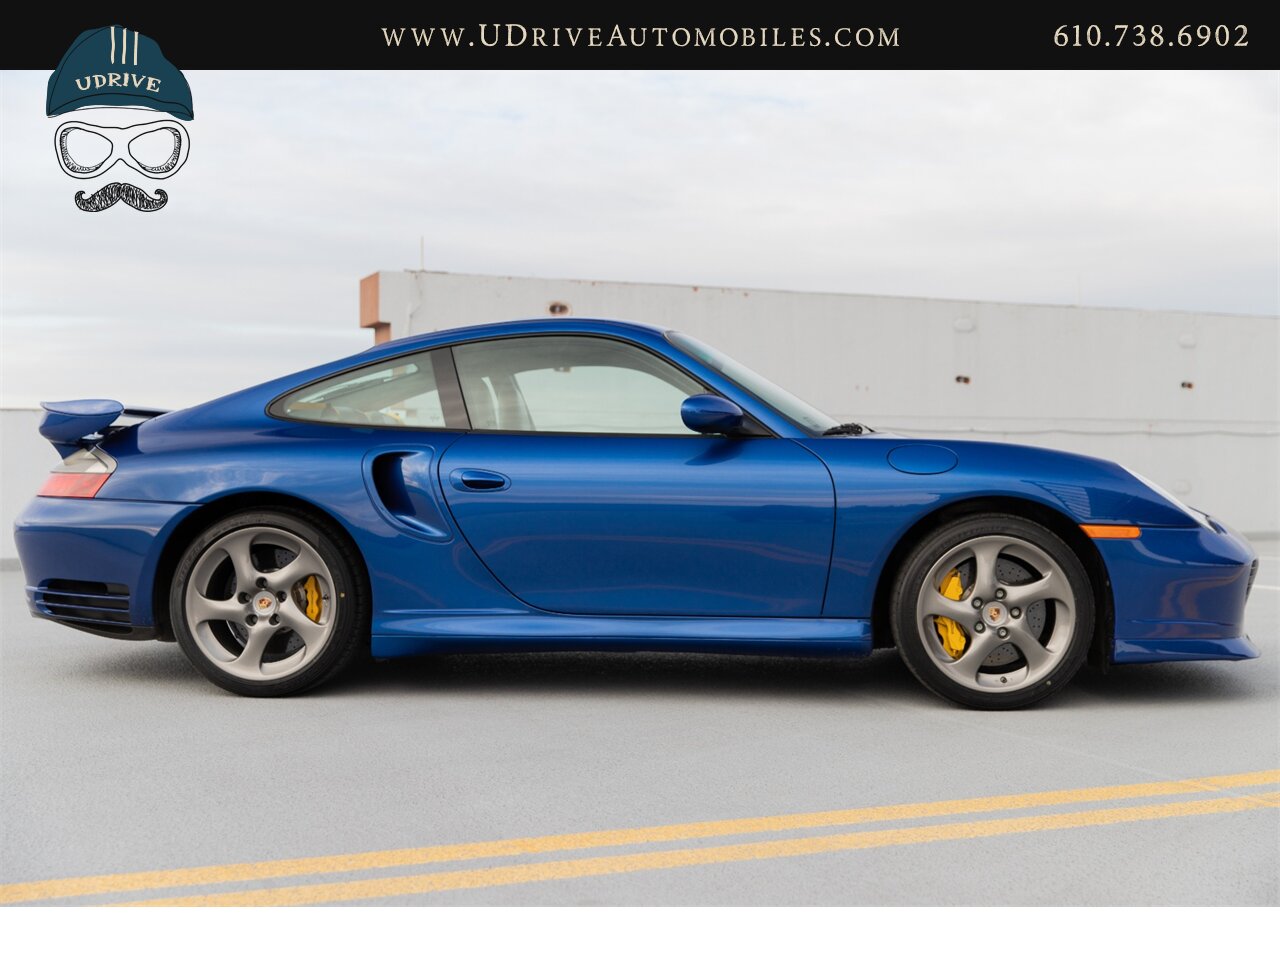 2005 Porsche 911 Turbo S Factory Aerokit Extremely Rare Cobalt Blue  Yellow Deviating Stitching 1 of a Kind Spec $160k MSRP - Photo 18 - West Chester, PA 19382